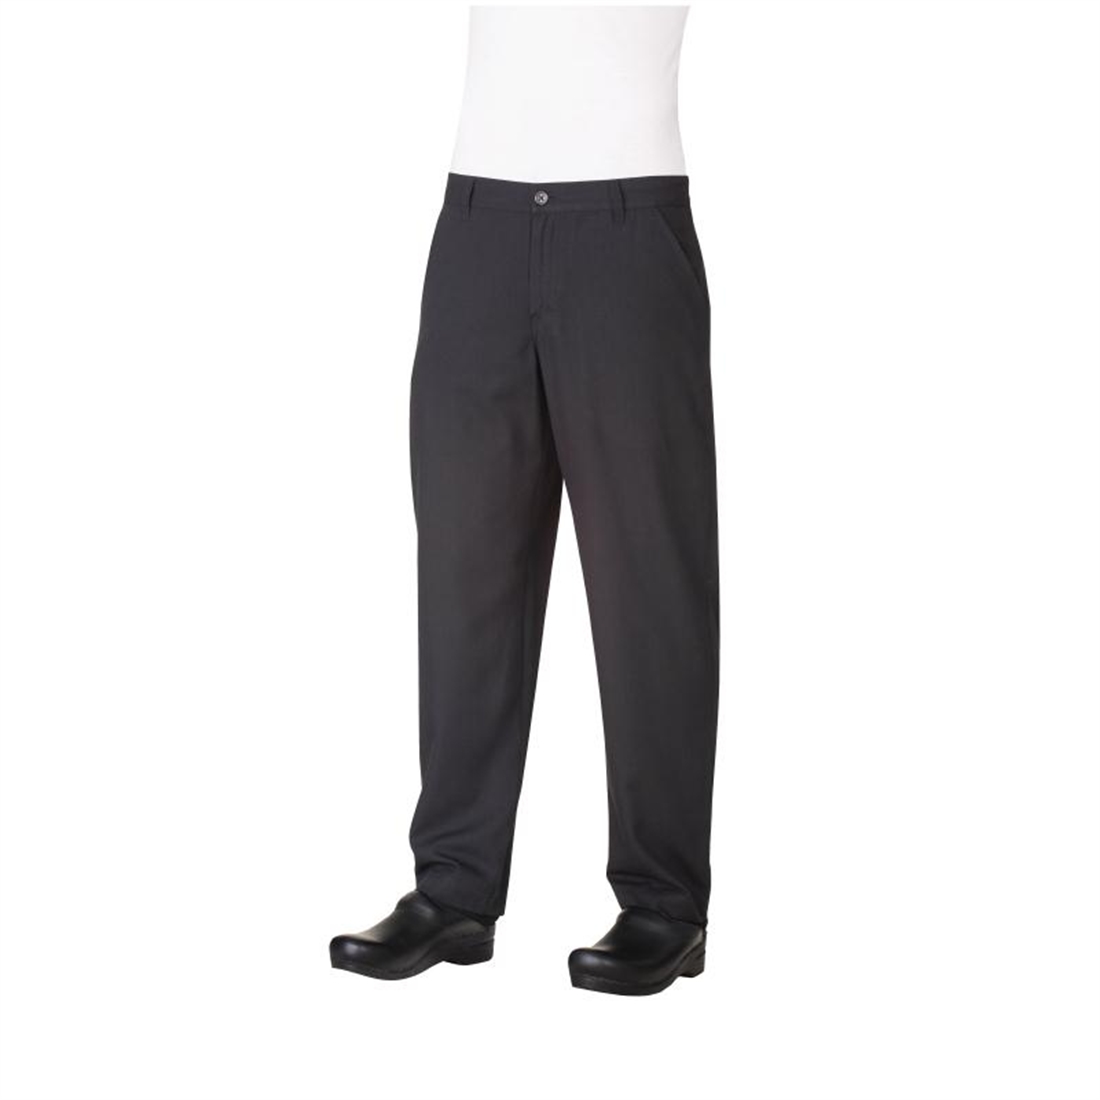 NEW Dennys Black and White / Grey Checked Chef Trousers SALE Size Medium 34" 